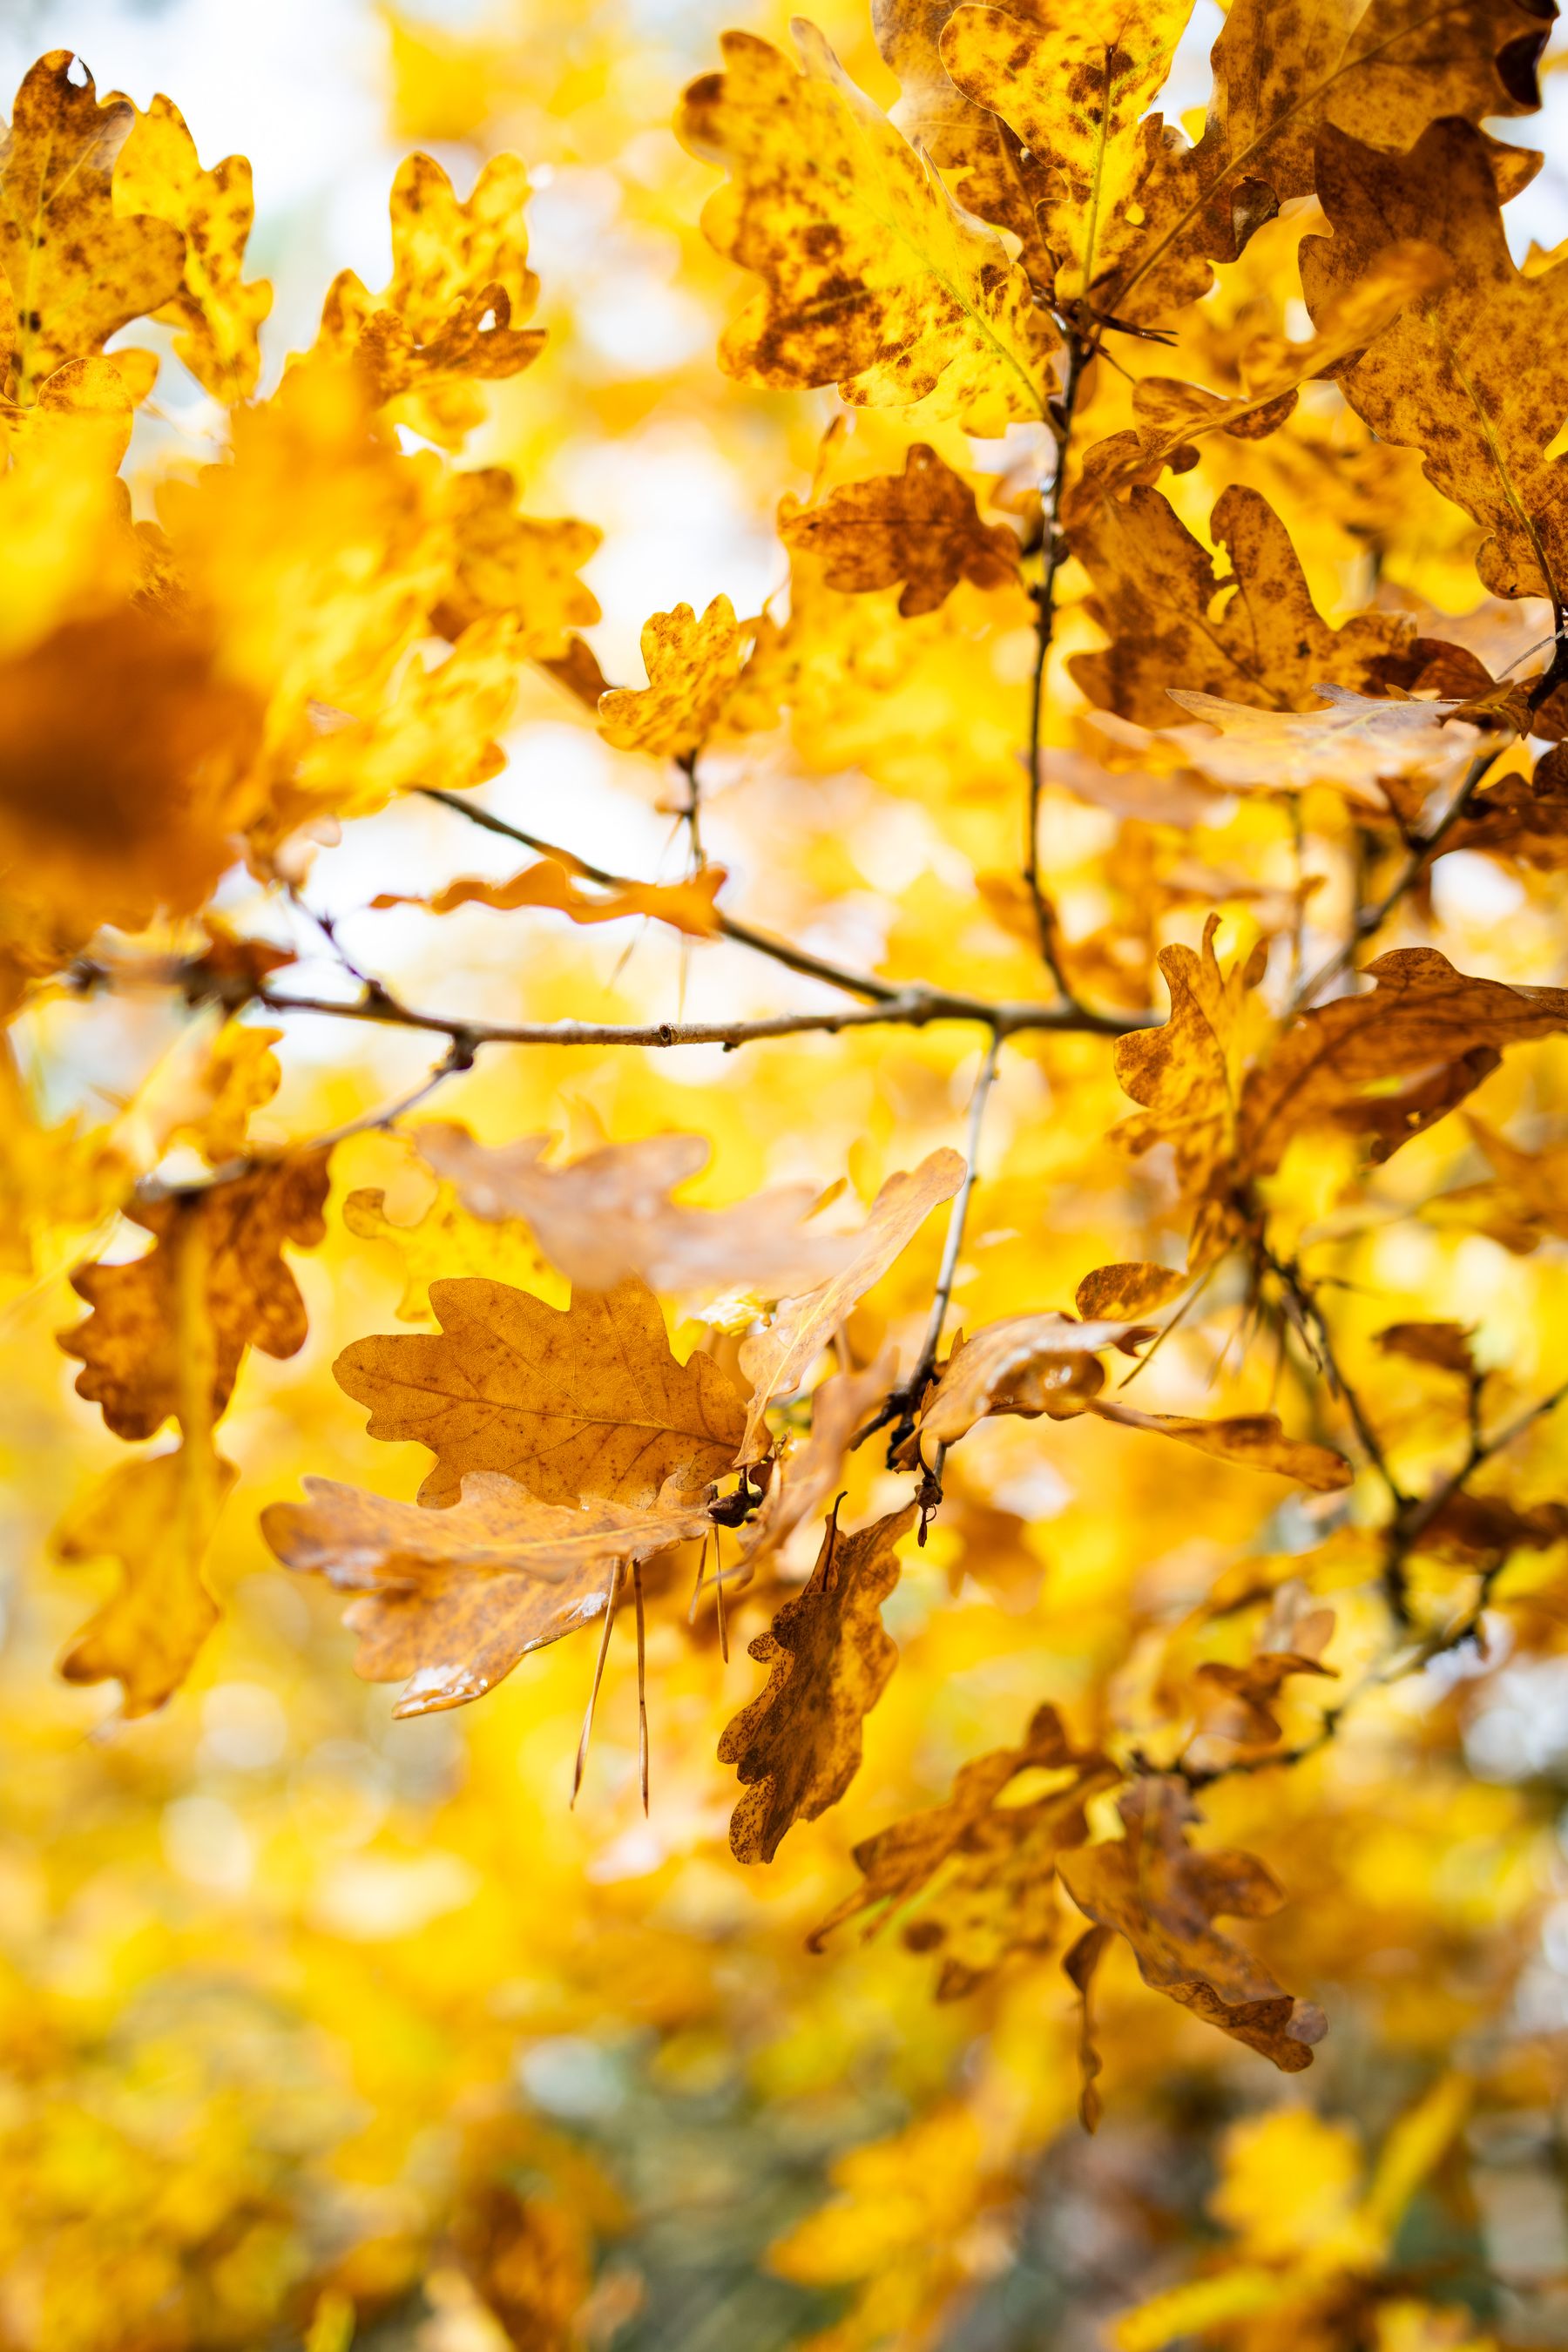 Close-up of vibrant yellow and brown oak leaves in soft focus, with sunlight filtering through the foliage, highlighting the intricate textures and warm hues of the autumn season.